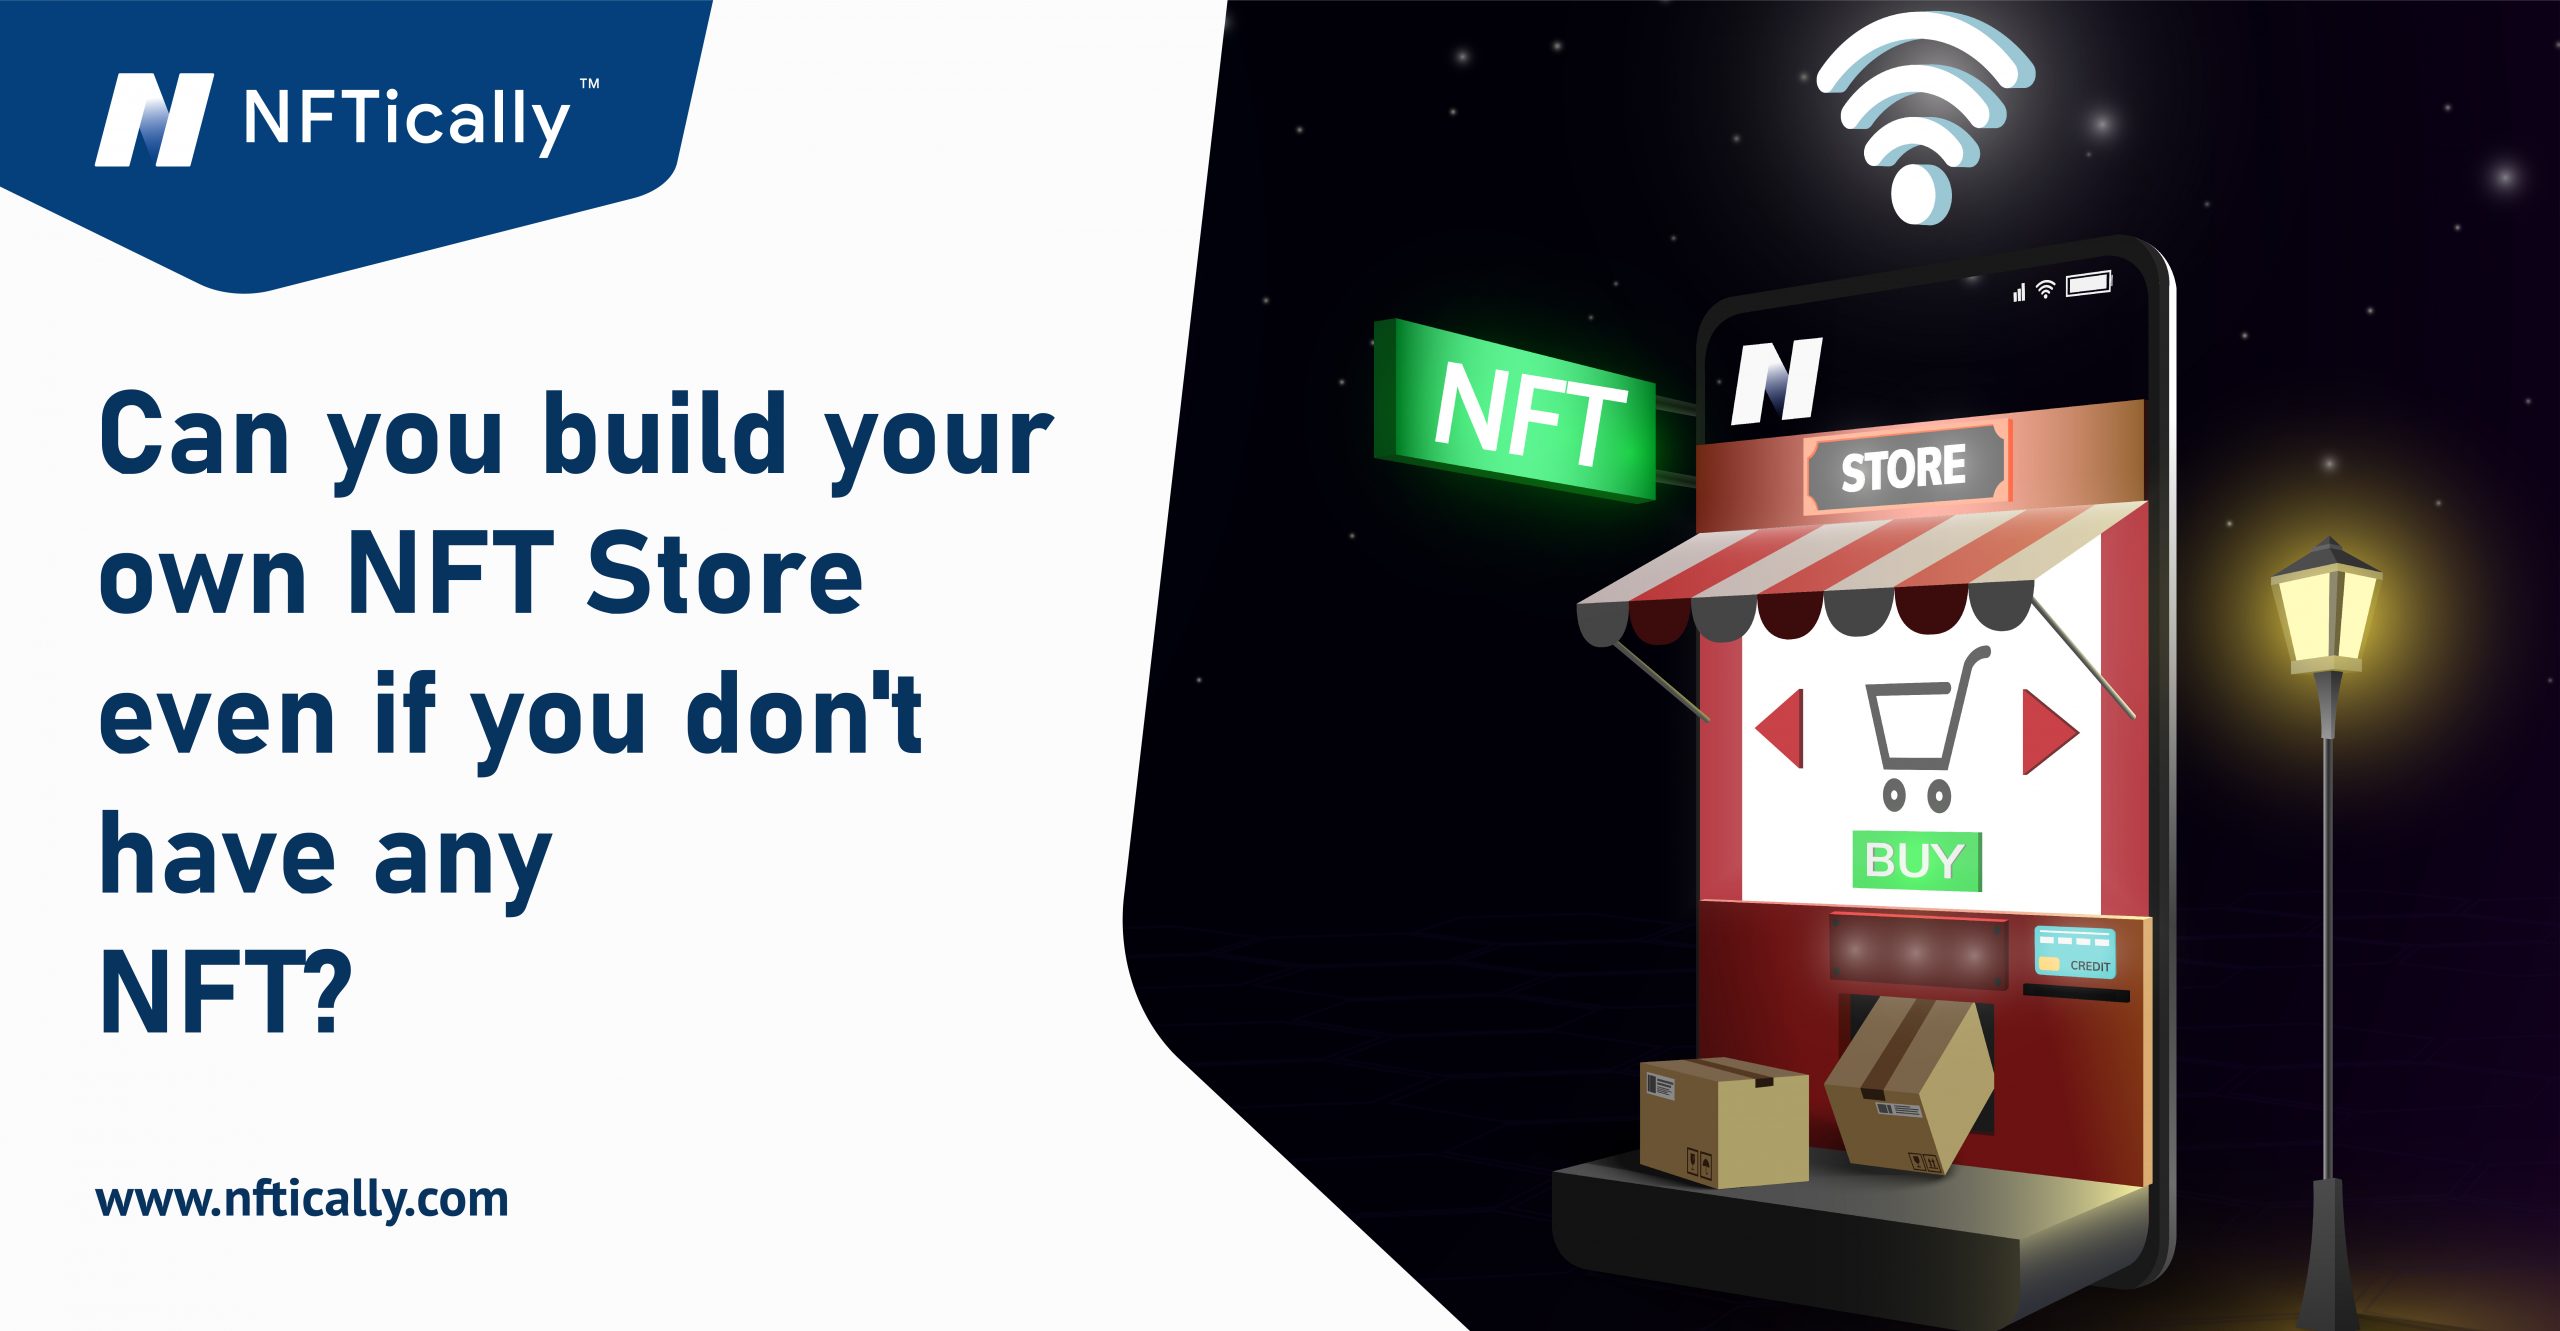 Can you build your own NFT Store even if you don’t have any NFT?